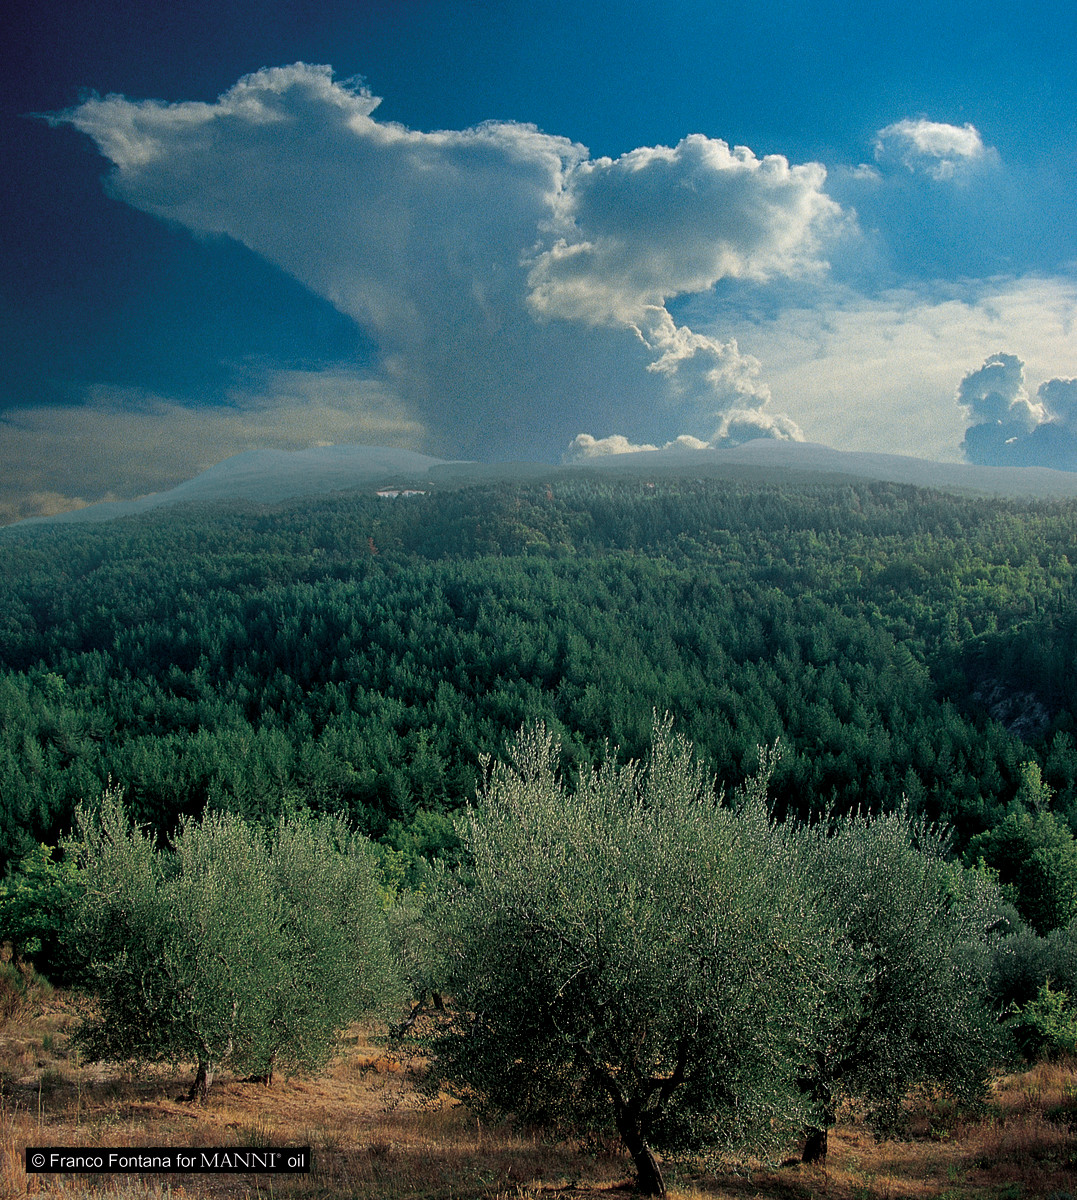 Aerial view of Manni Oil olive trees in Tuscany.